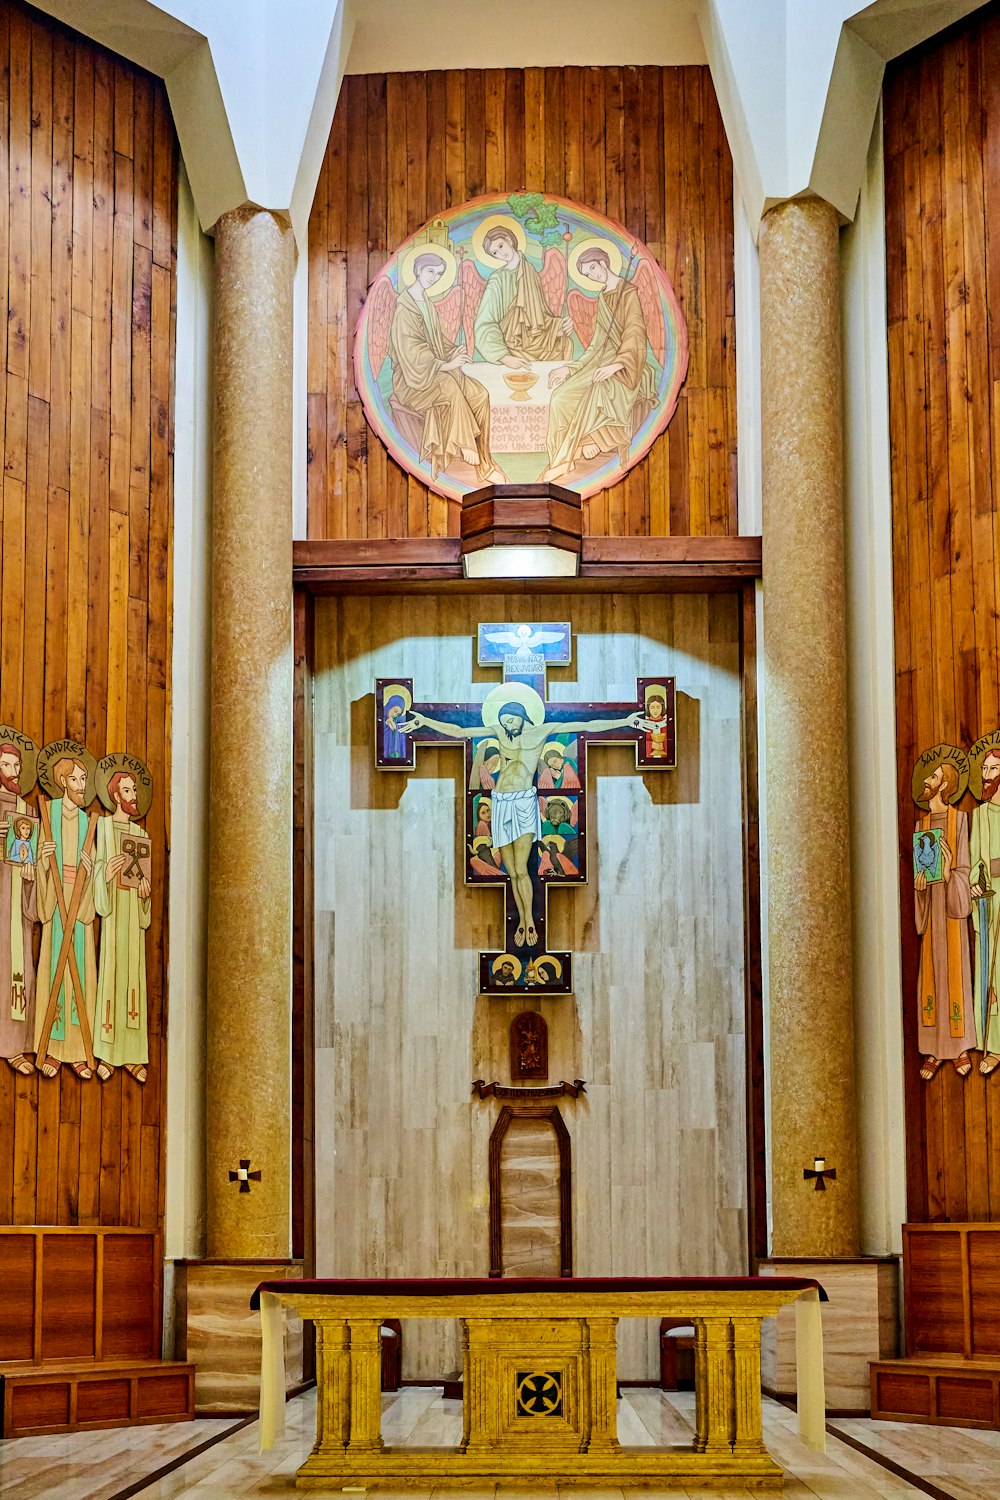 a wooden alter with a cross on it in a church